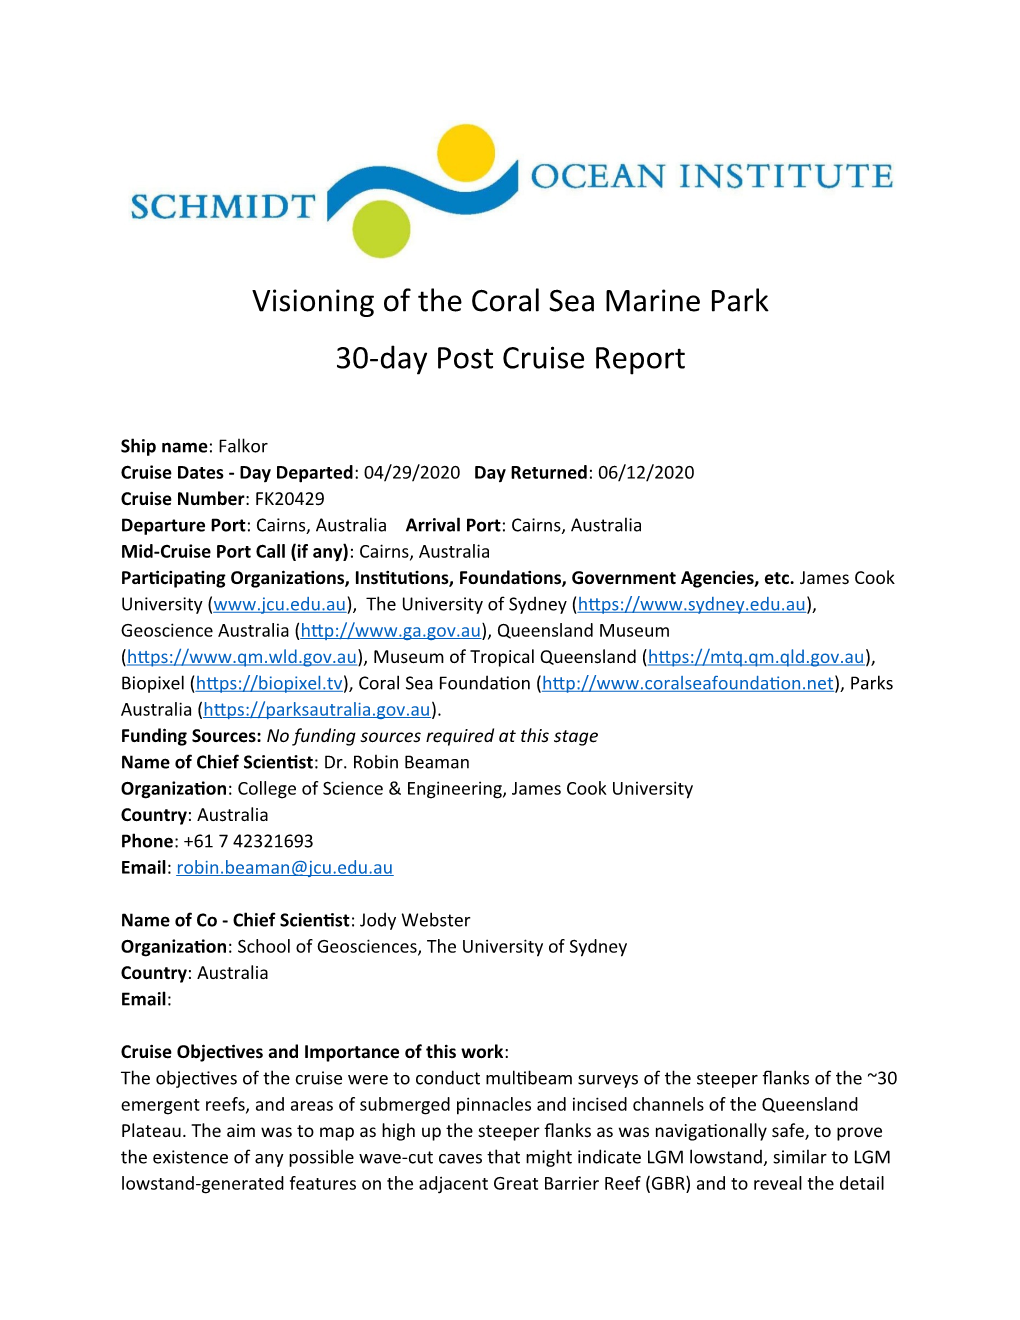 Visioning of the Coral Sea Marine Park 30-Day Post Cruise Report